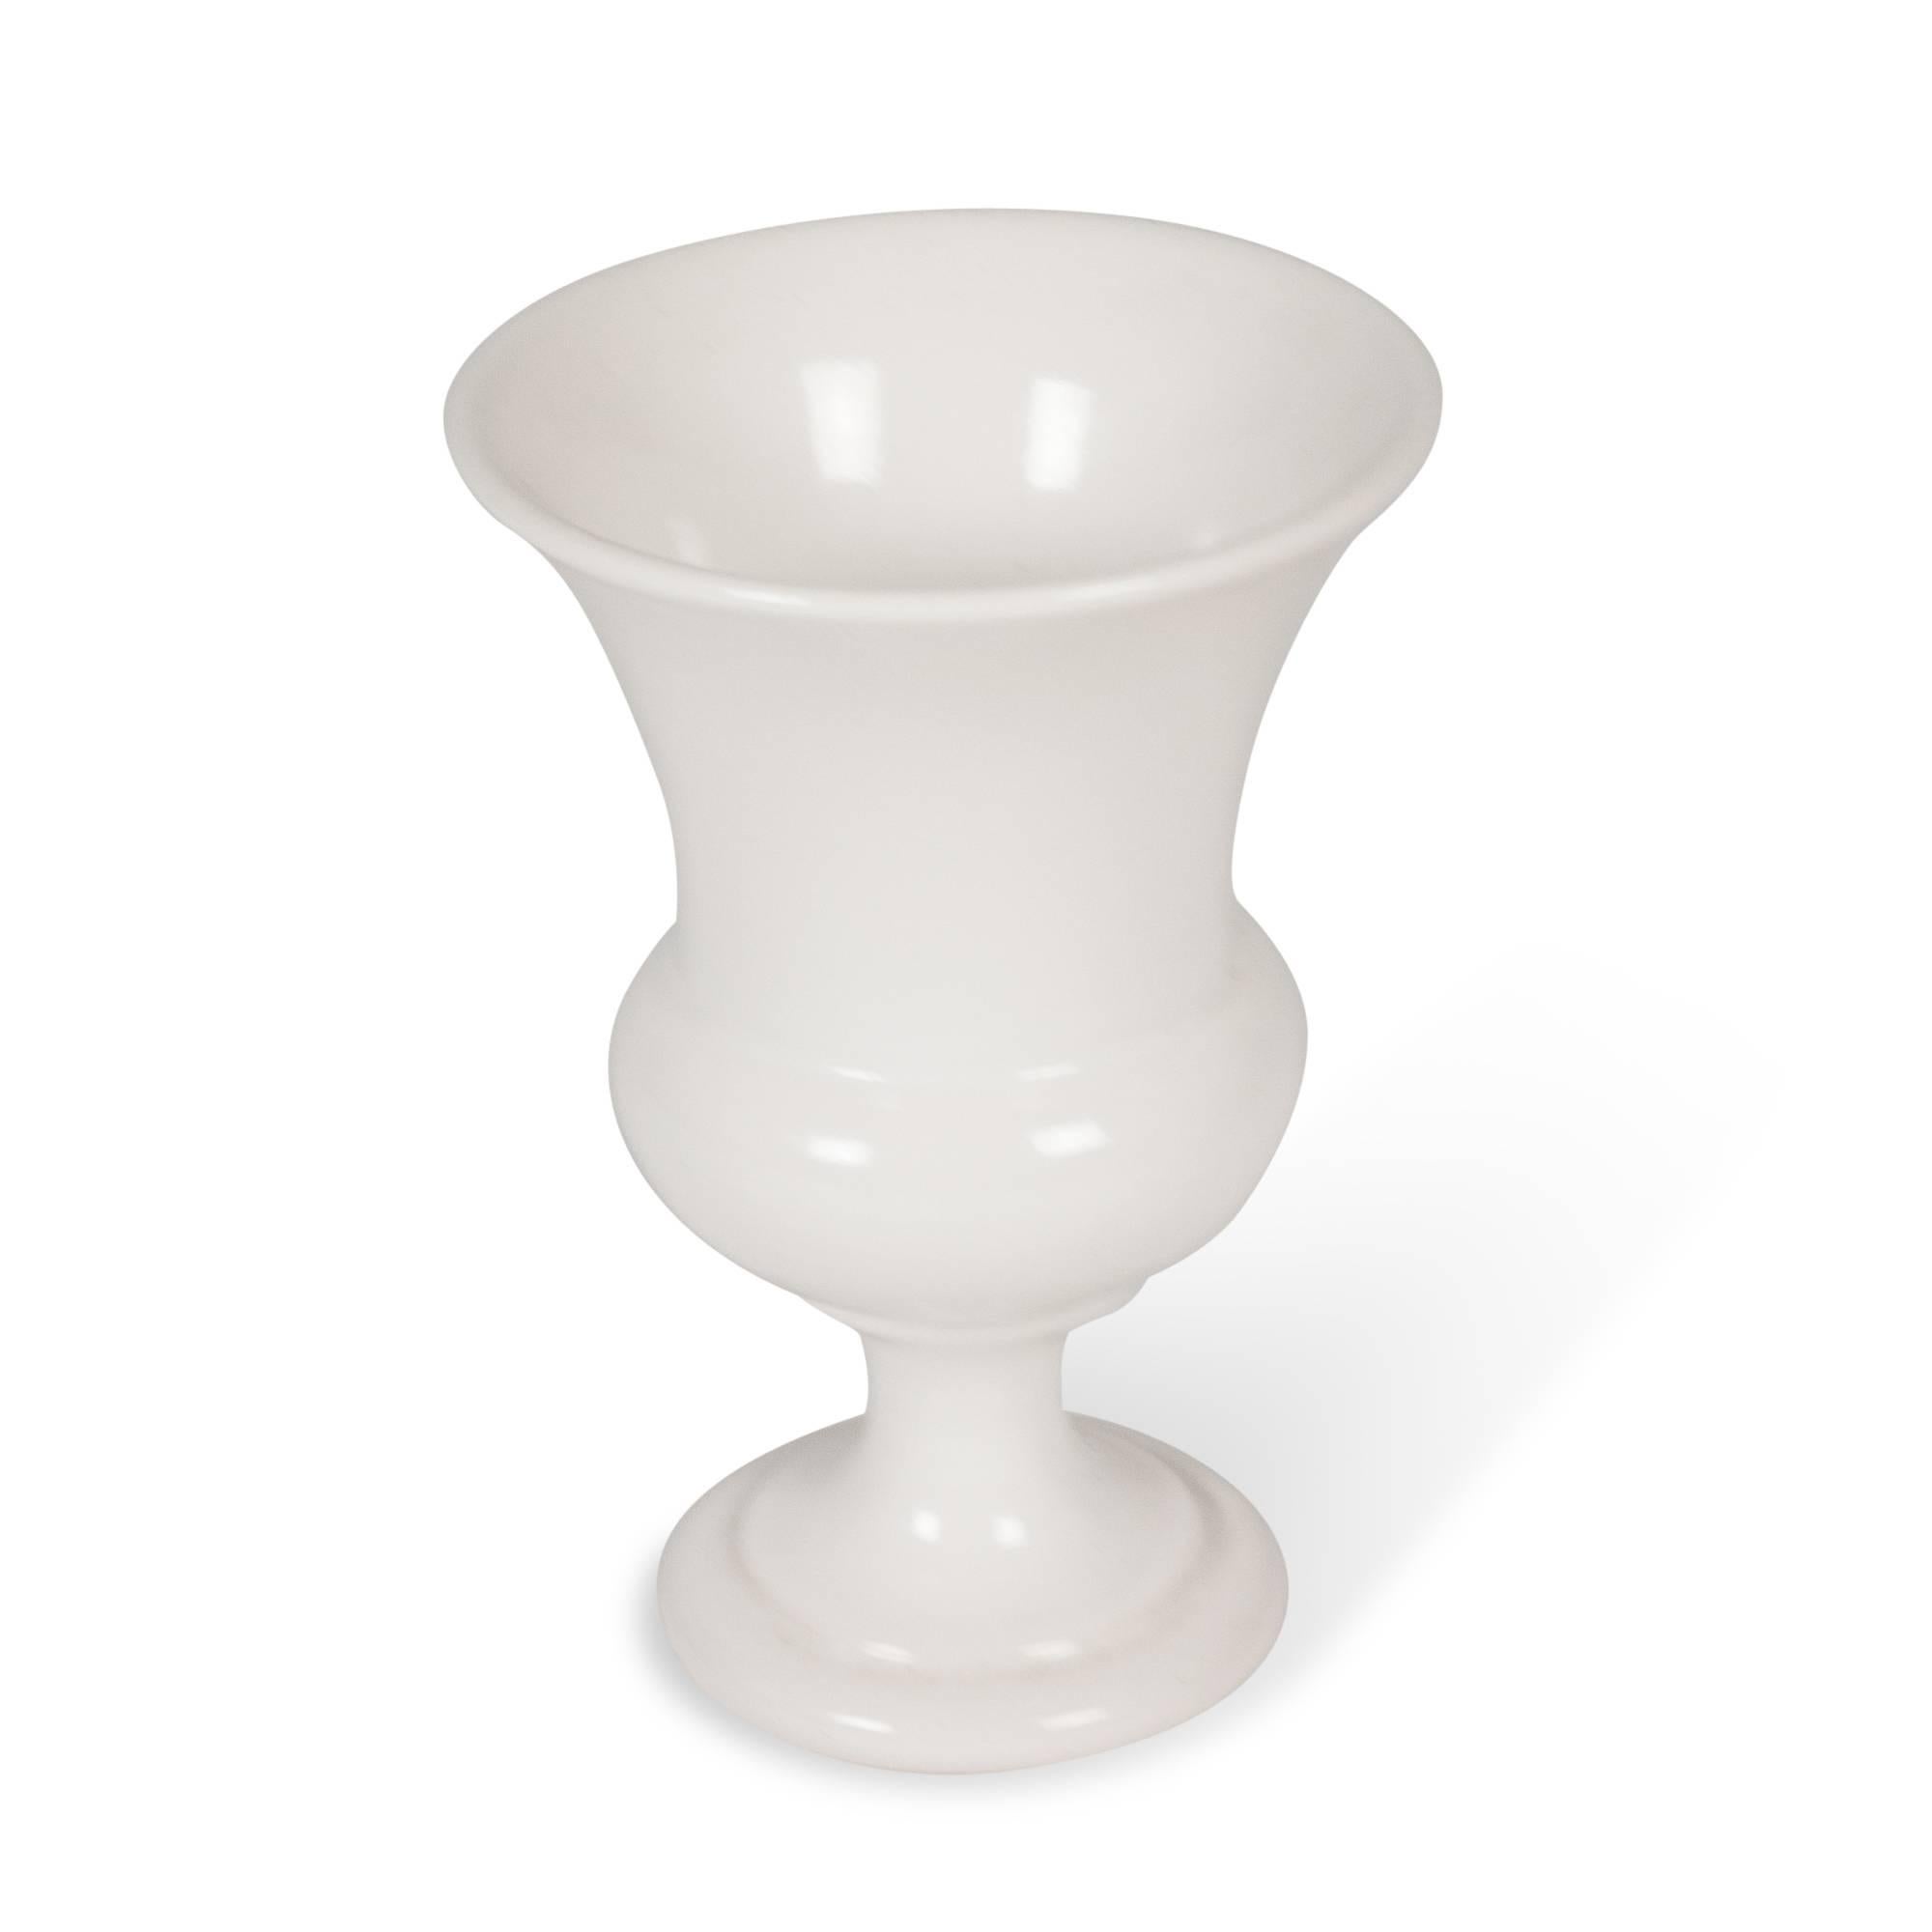 White ceramic urn form vase, tapered open body on foot, by Pol Chambost, France, circa 1950. Signed to underside. Measures: Height 7 3/4 in, diameter of opening 5 in, diameter of base 3 1/2 in.